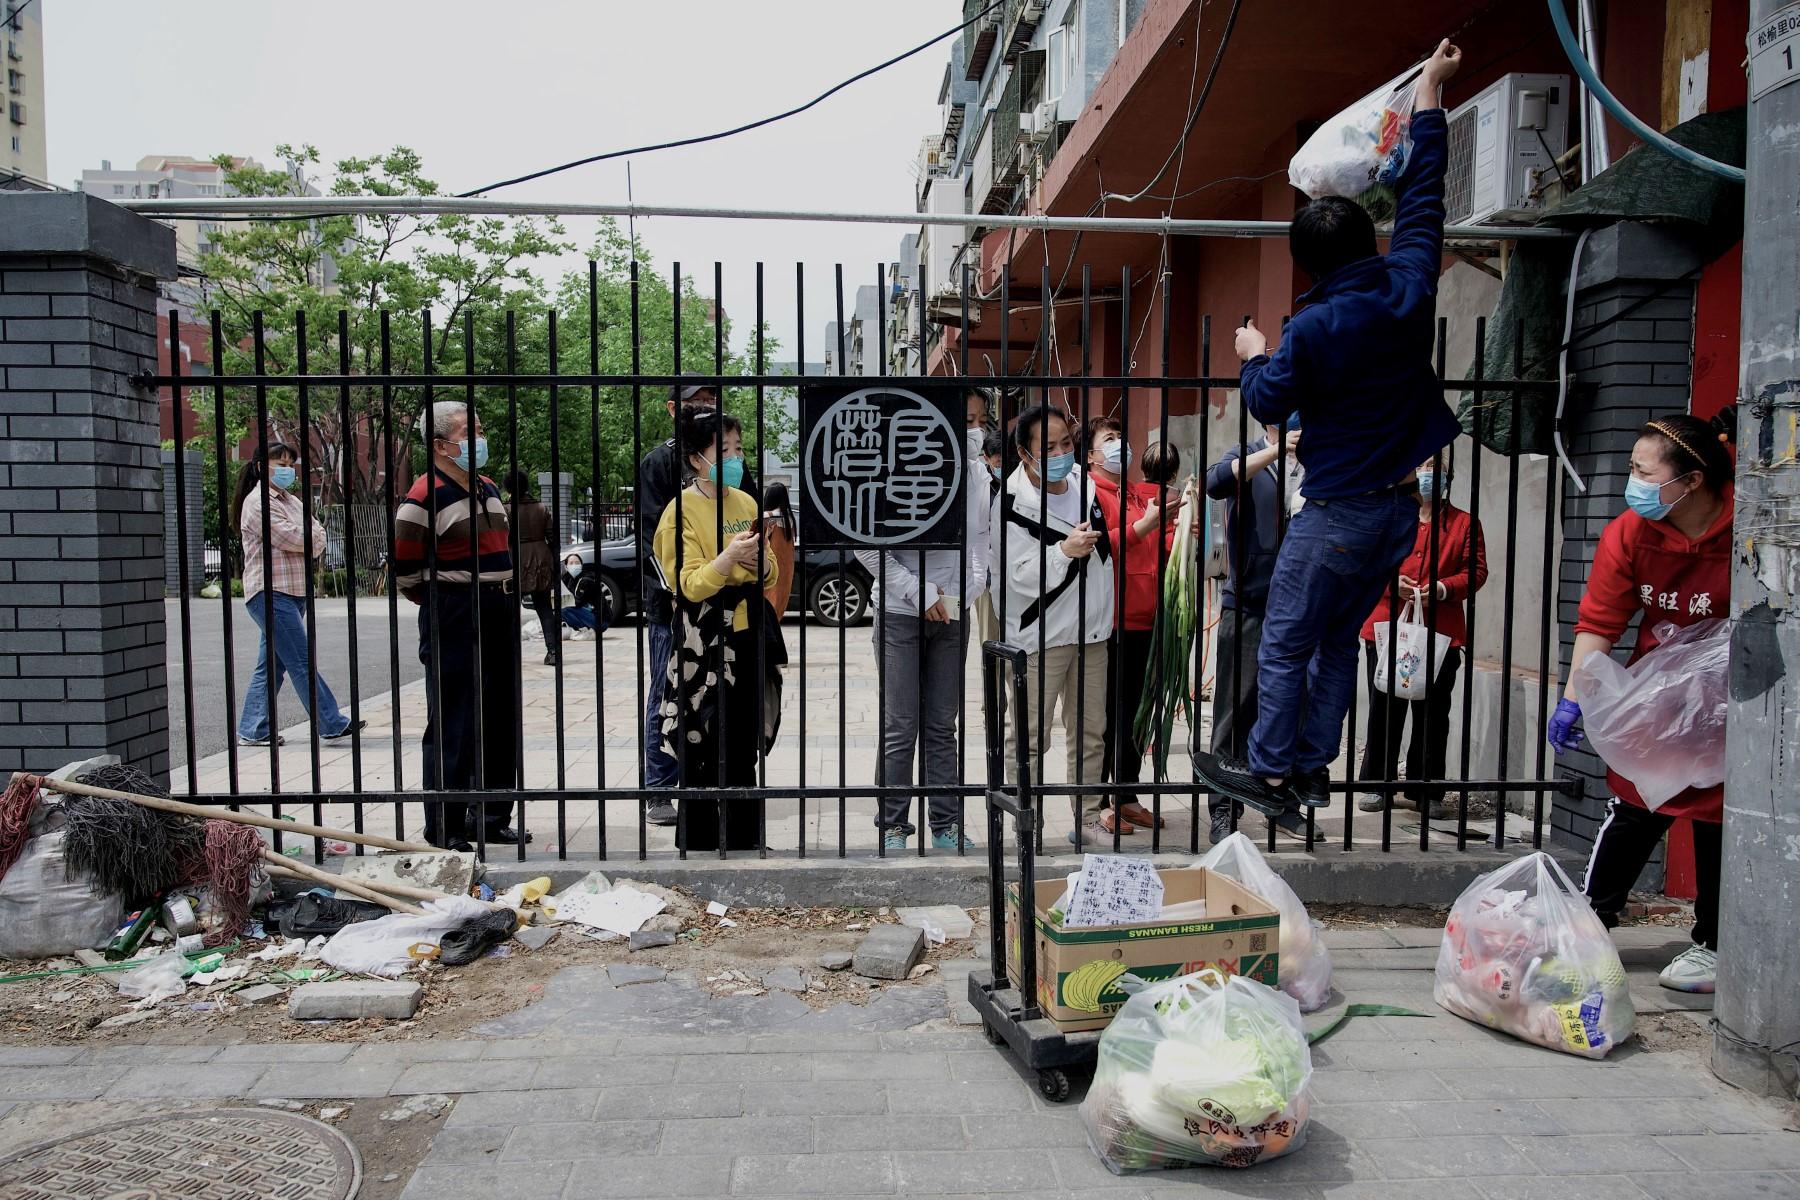 A delivery worker (right) passes items over a fence to people in a residential area under lockdown due to Covid-19 restrictions in Beijing on May 9. Photo: AFP